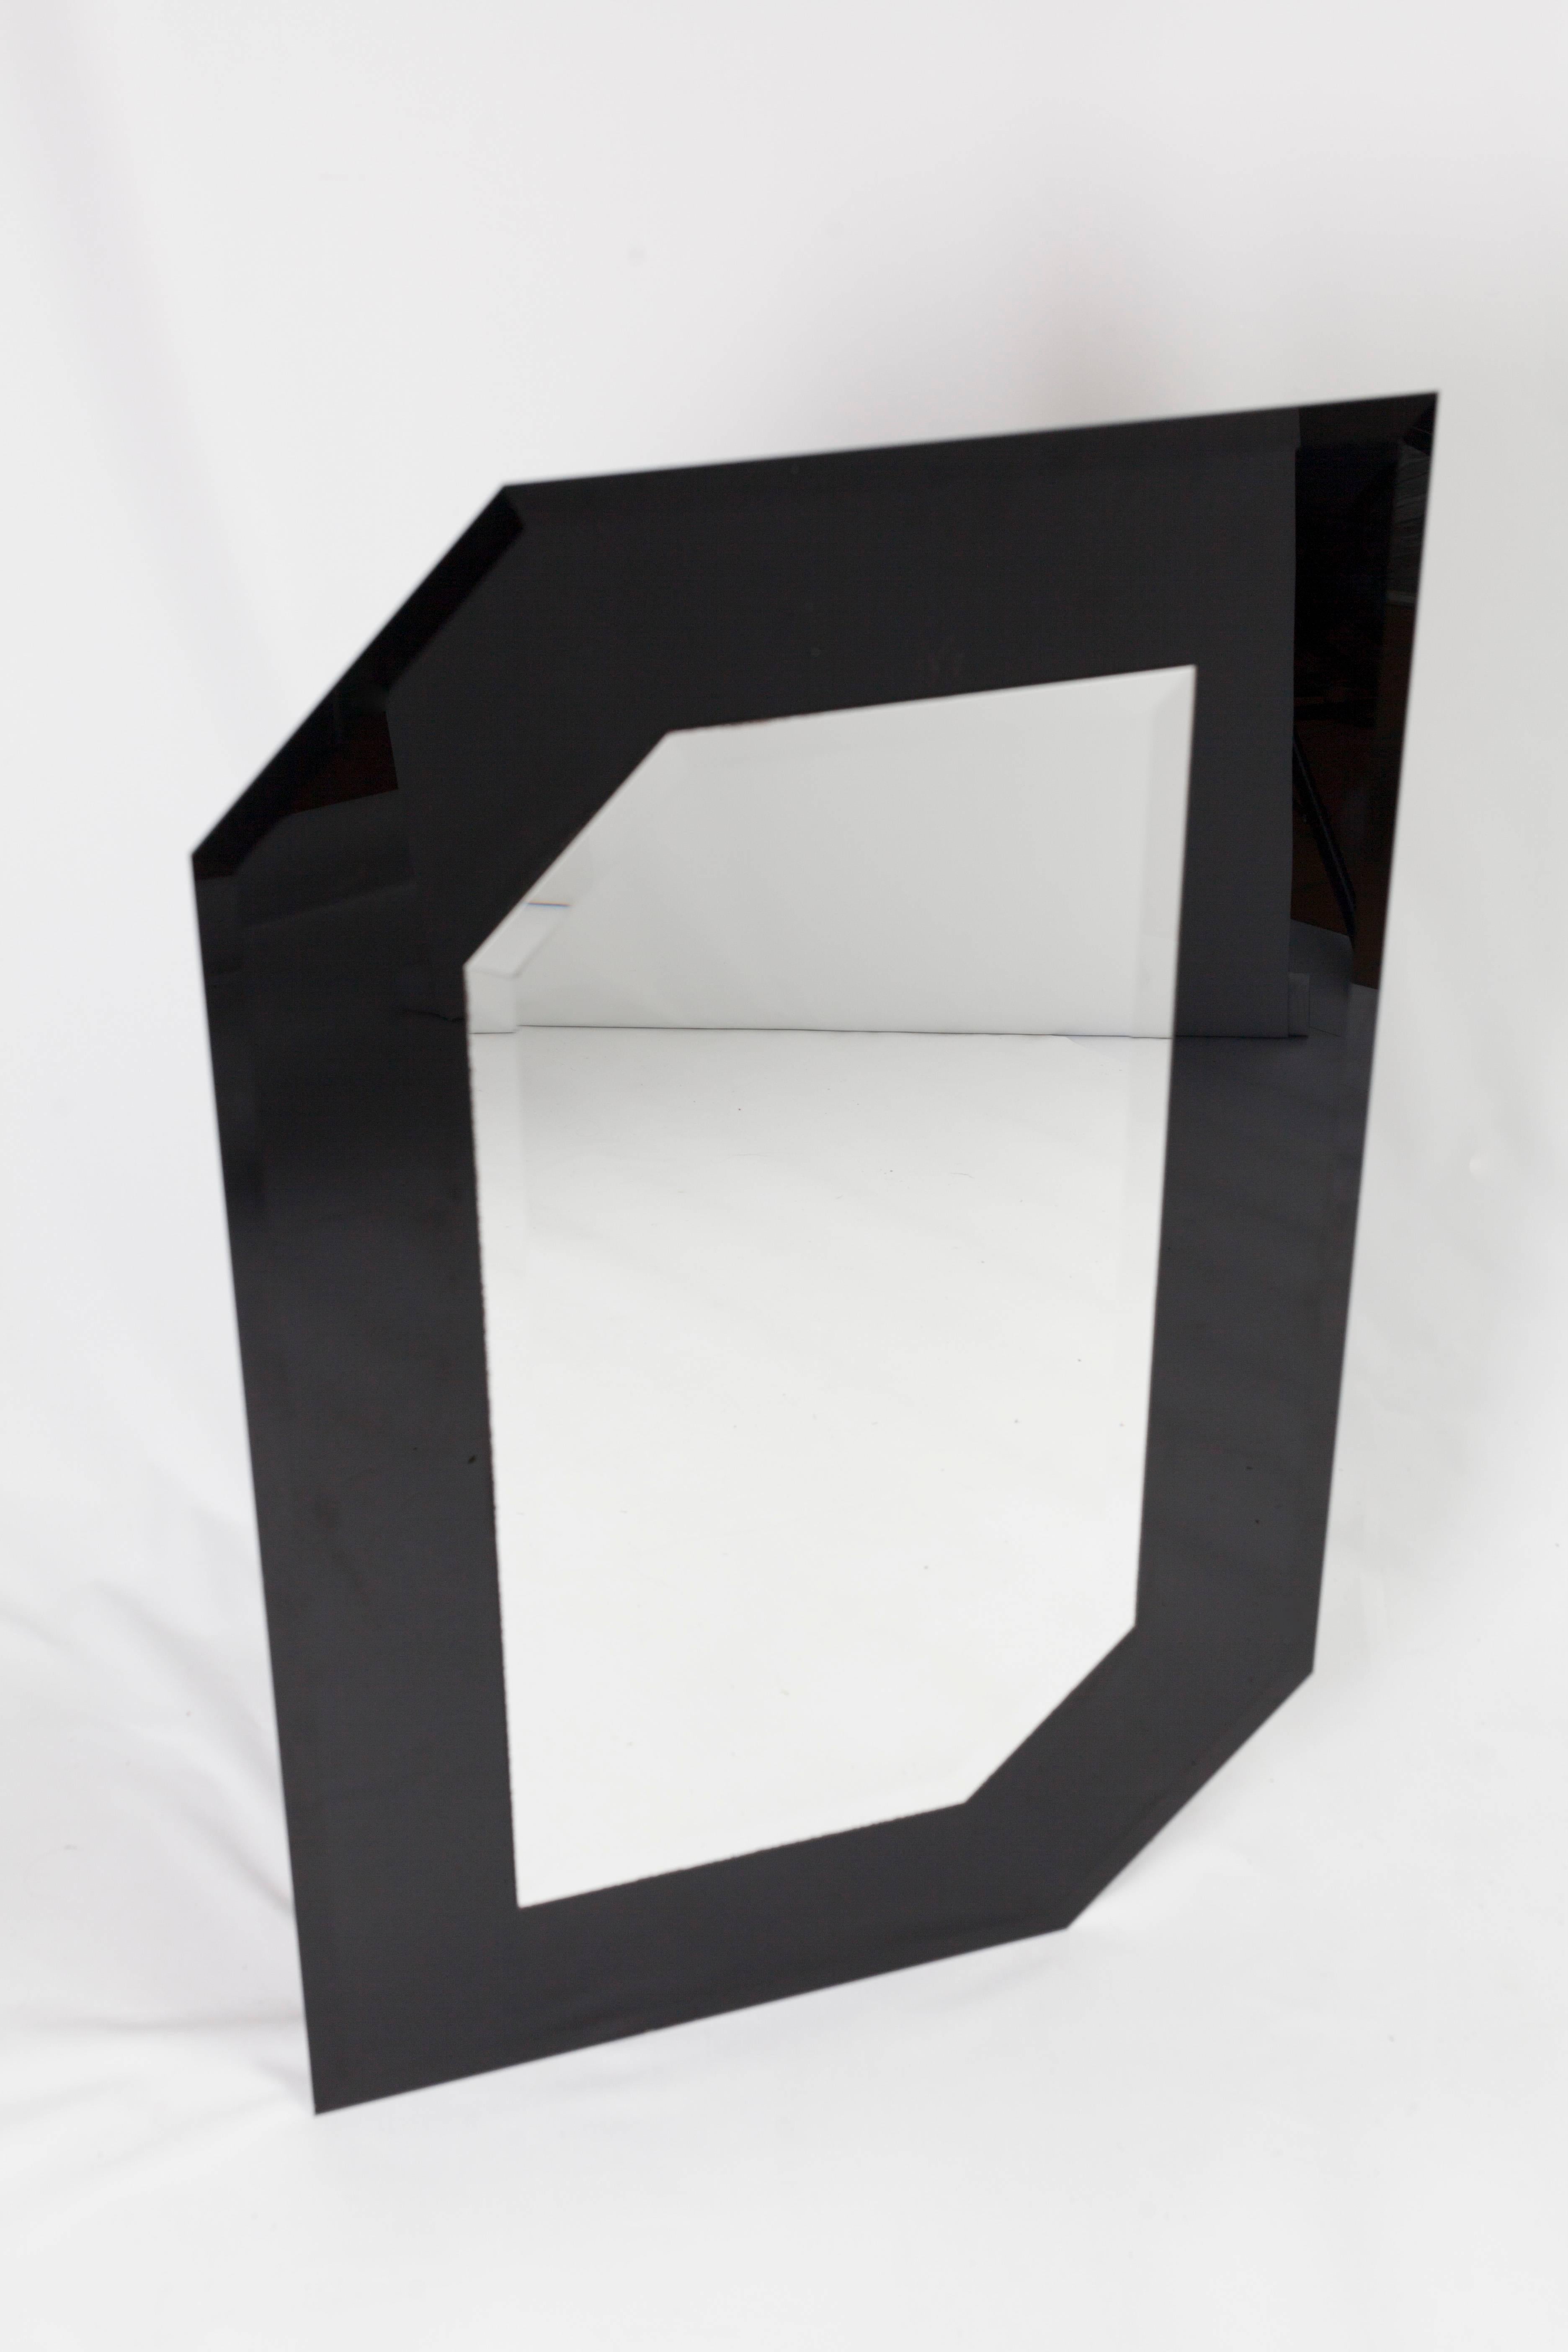 Beautiful asymmetric wall mirror with black glass 'frame' in postmodern style.
This mirror is made of a black glass asymmetric base with a mirror in the same asymmetric shape upon it.
Both the glass and the mirror have cut rims.